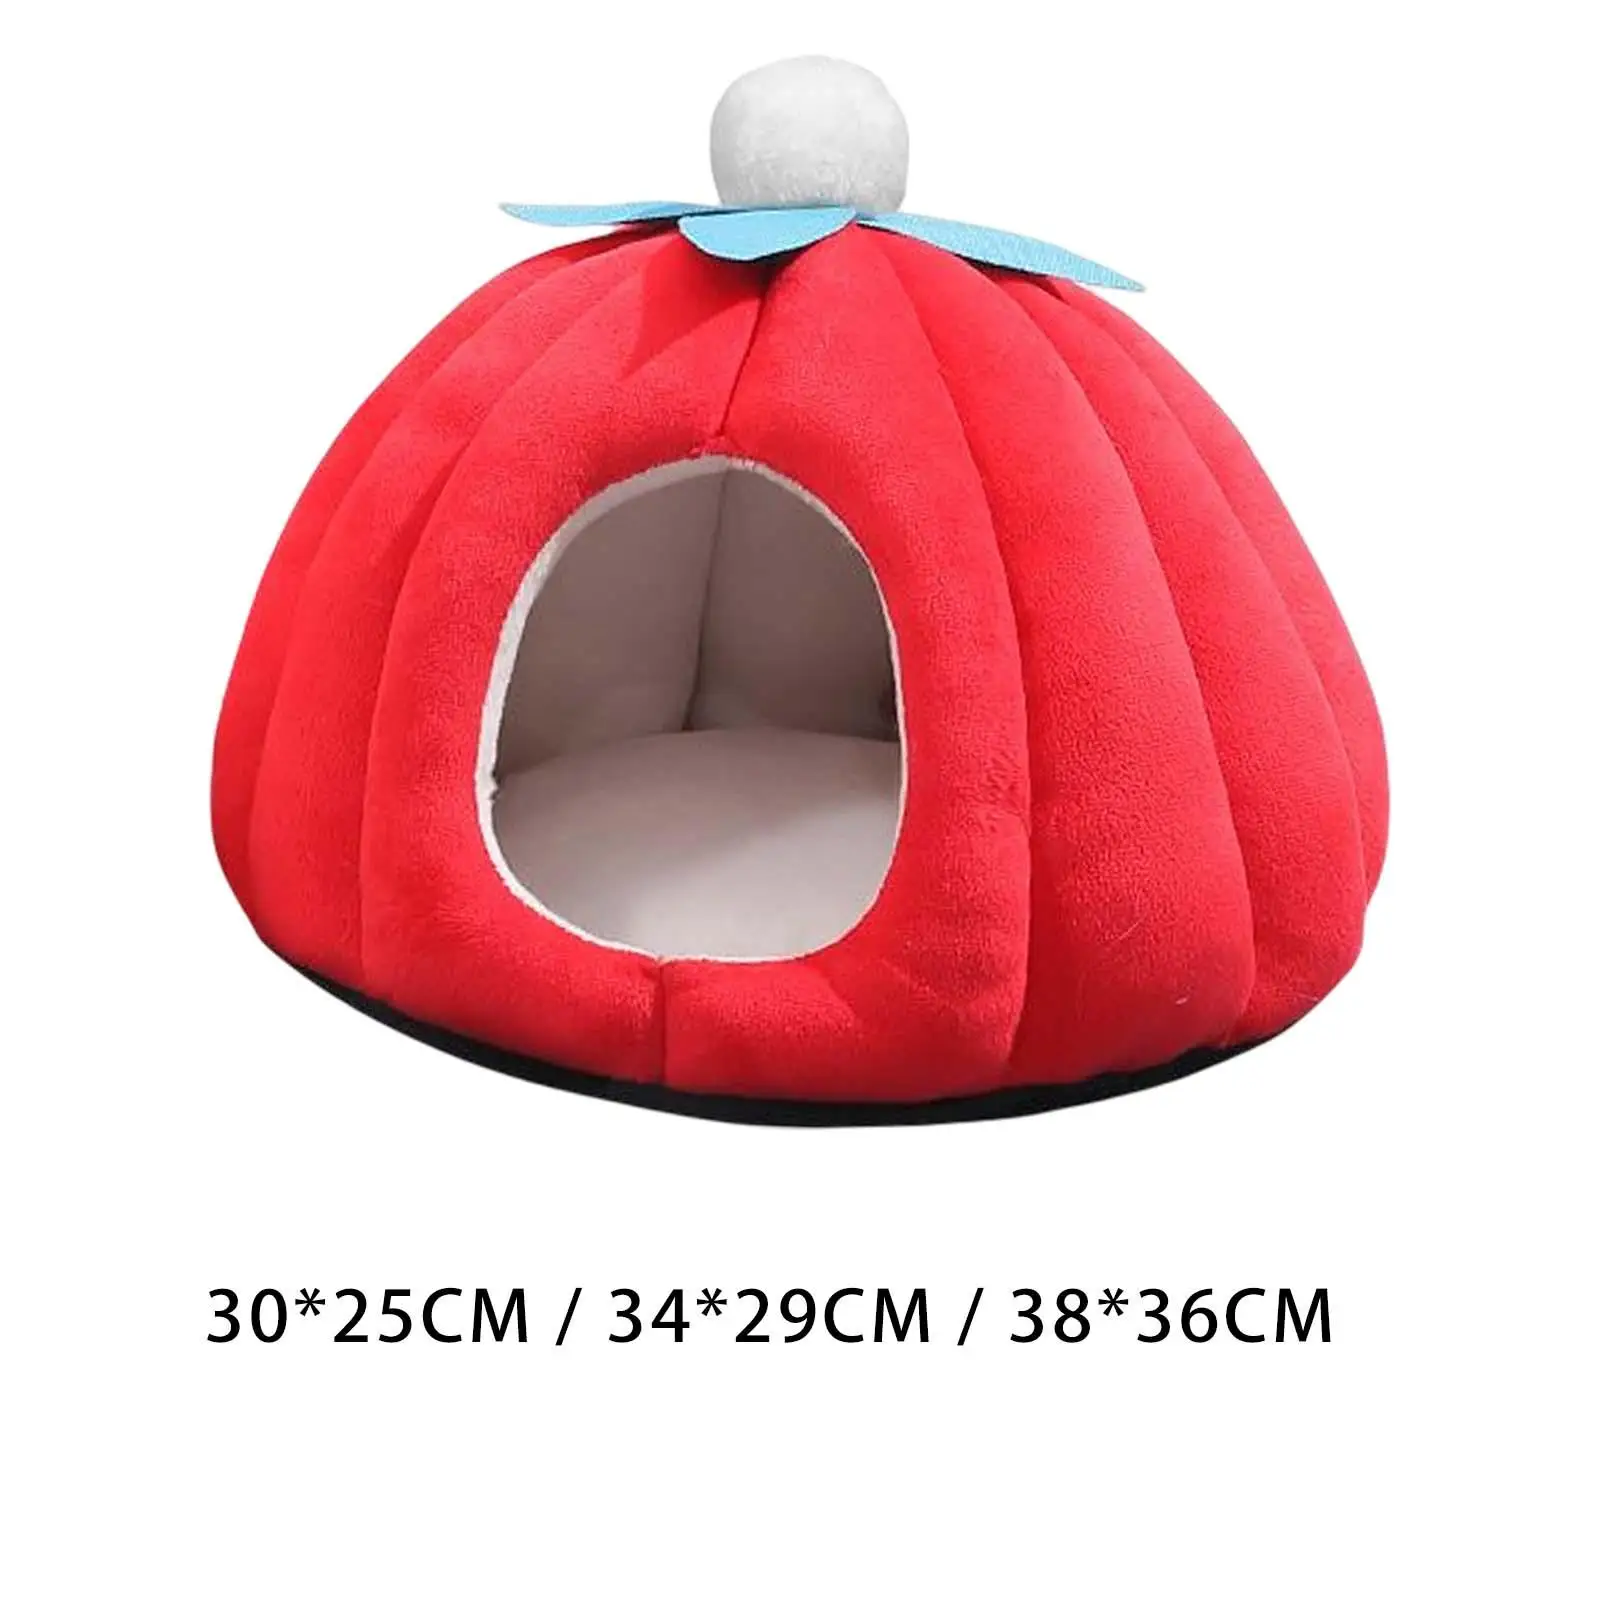 Cat Bed for Indoor Cats Pumpkin Shape Anti Slip Bottom Winter Warm House Small Animals Bed Small Dog Tent Bed Hideaway